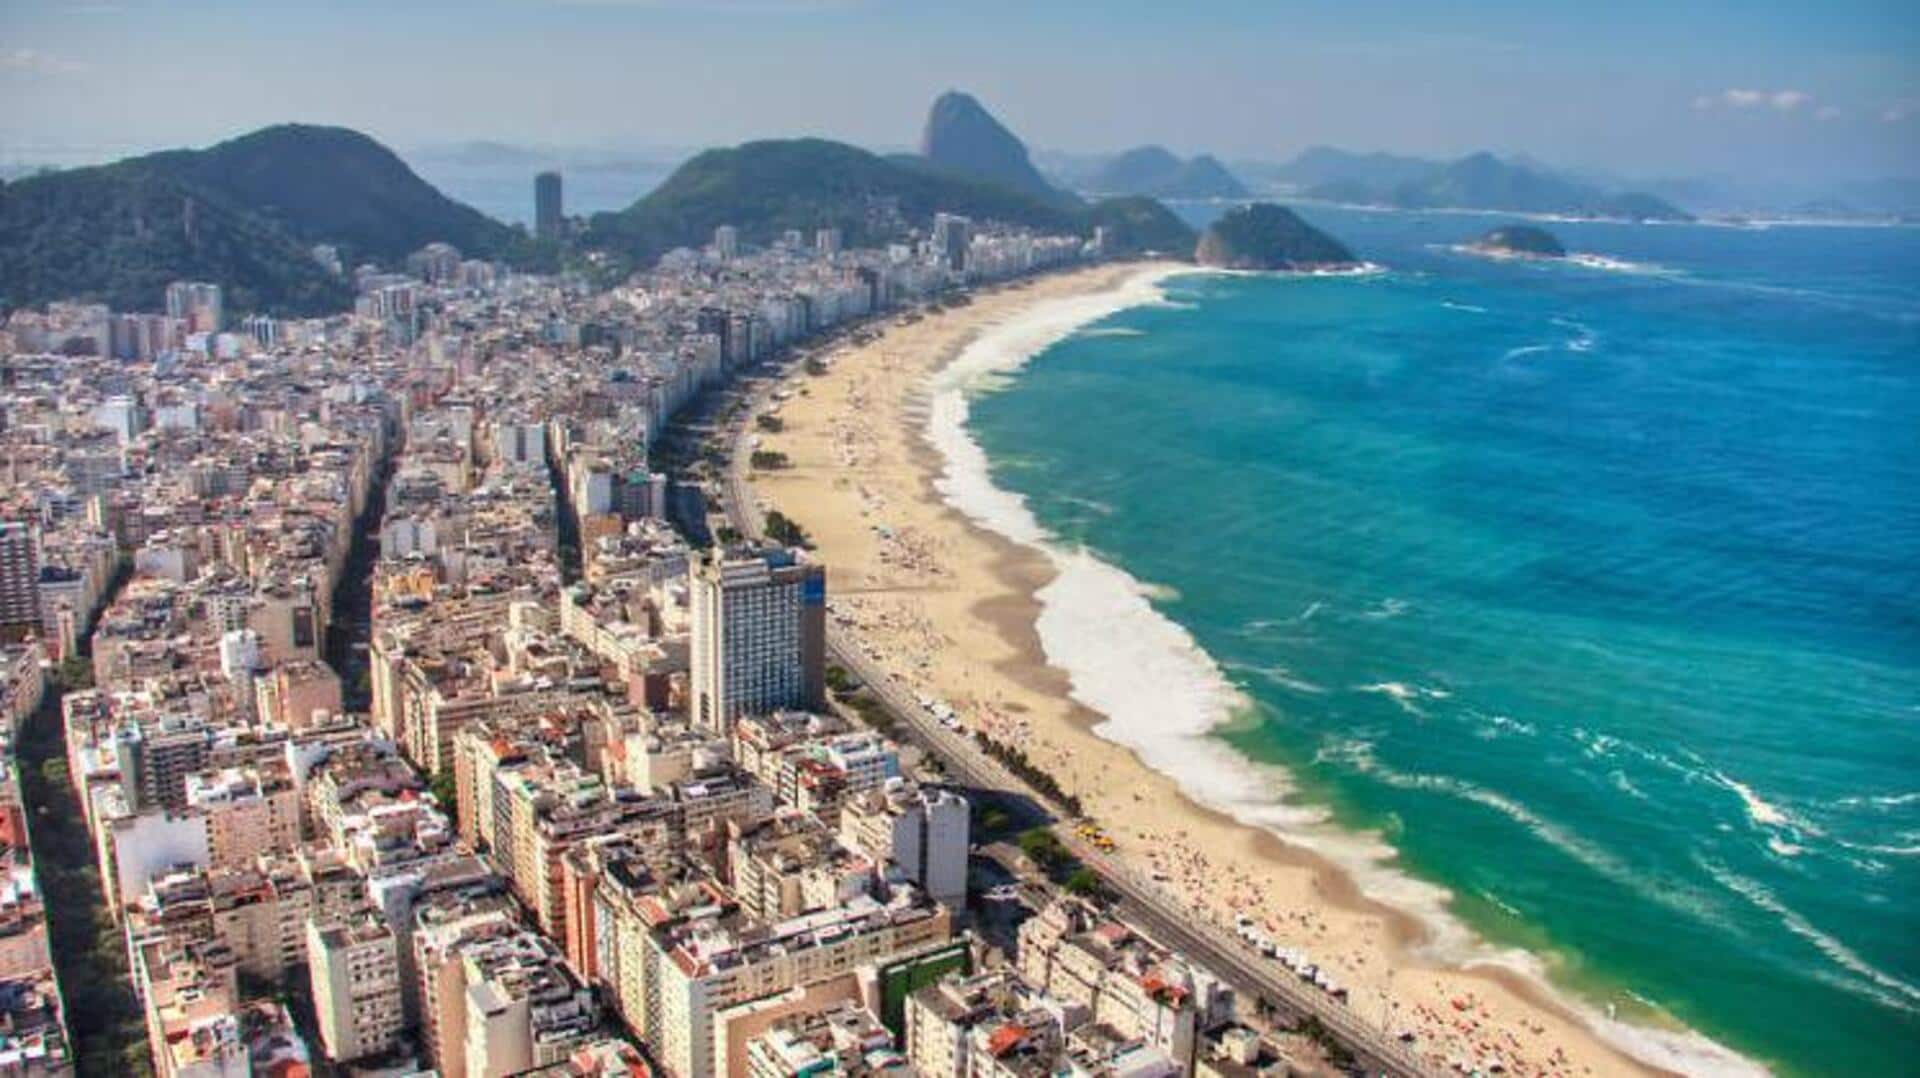 Head over to Rio's sun-soaked shorelines for a beautiful trip